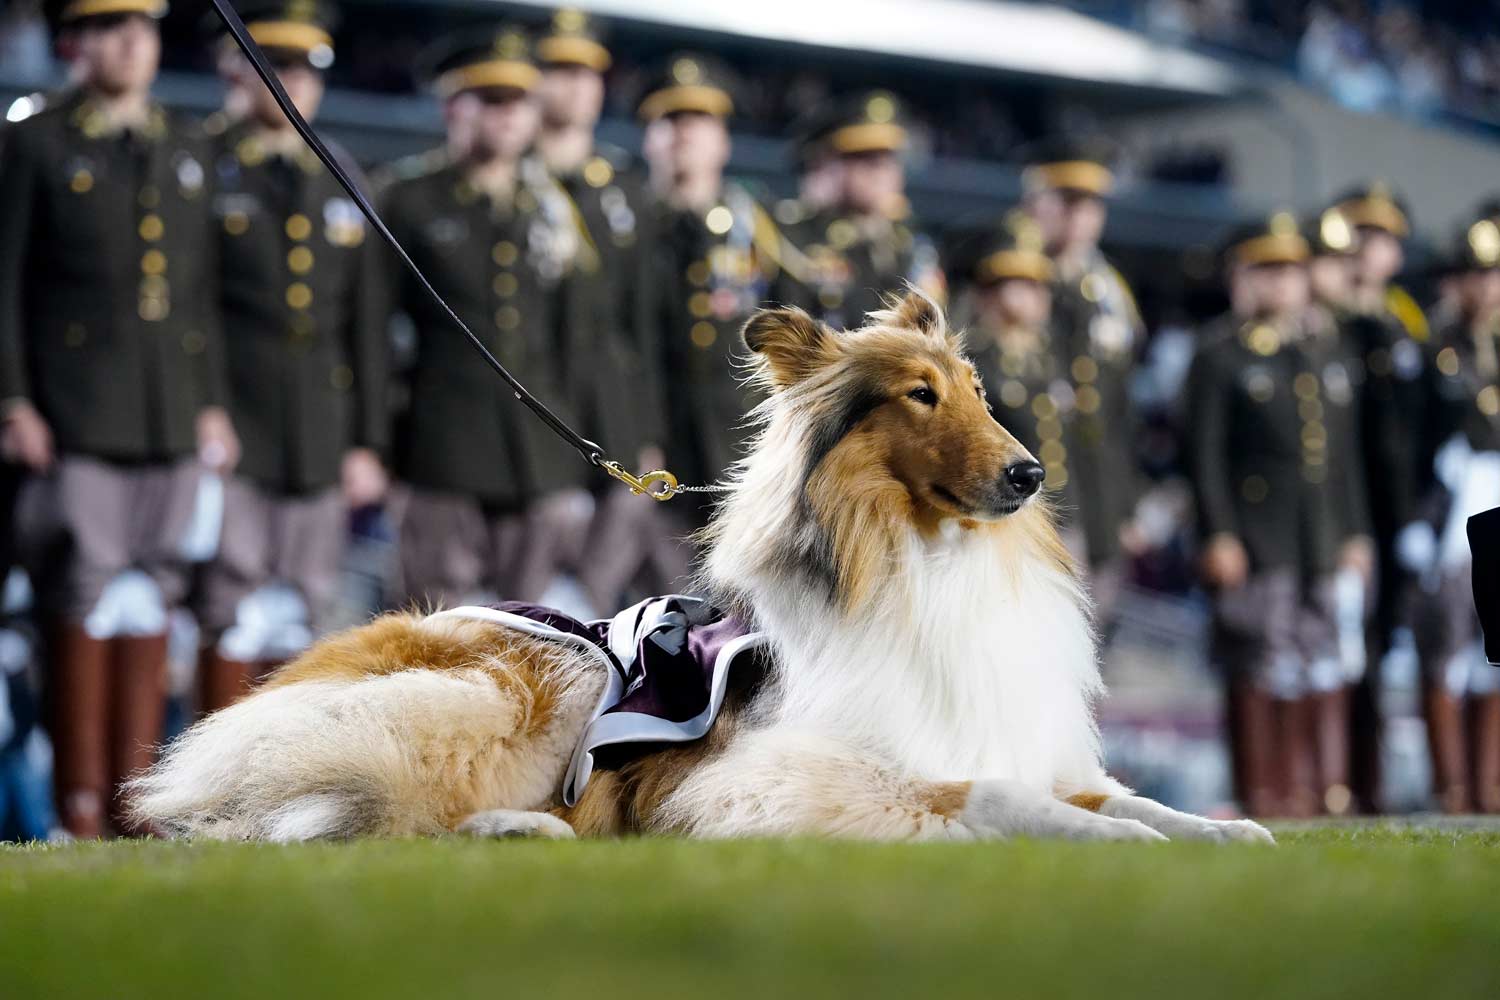 Texas A&M mascot, Reveille, laying on the sidelines of the football field